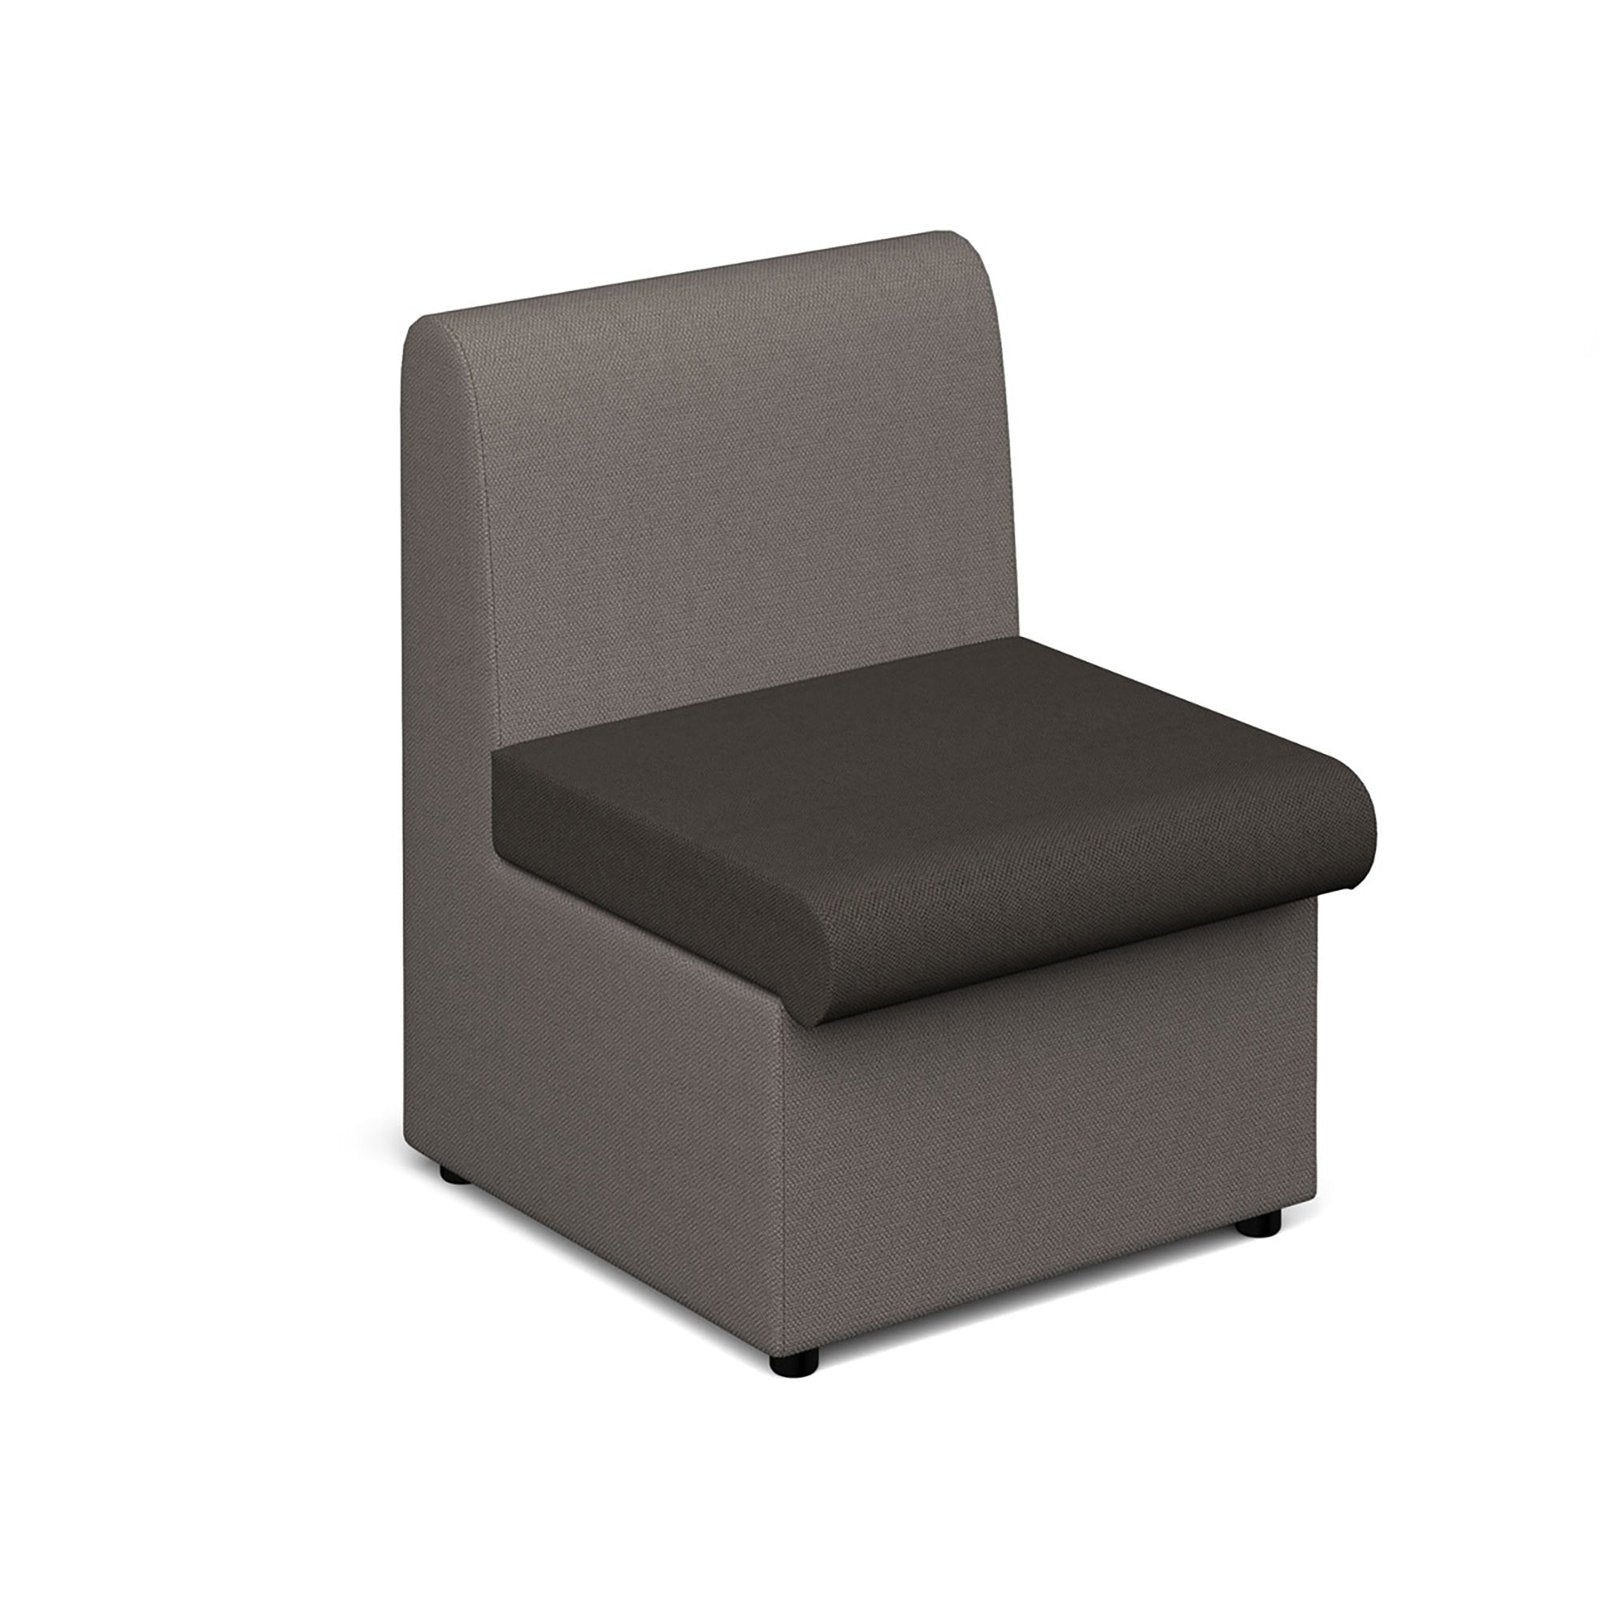 Alto modular reception seating - Office Products Online